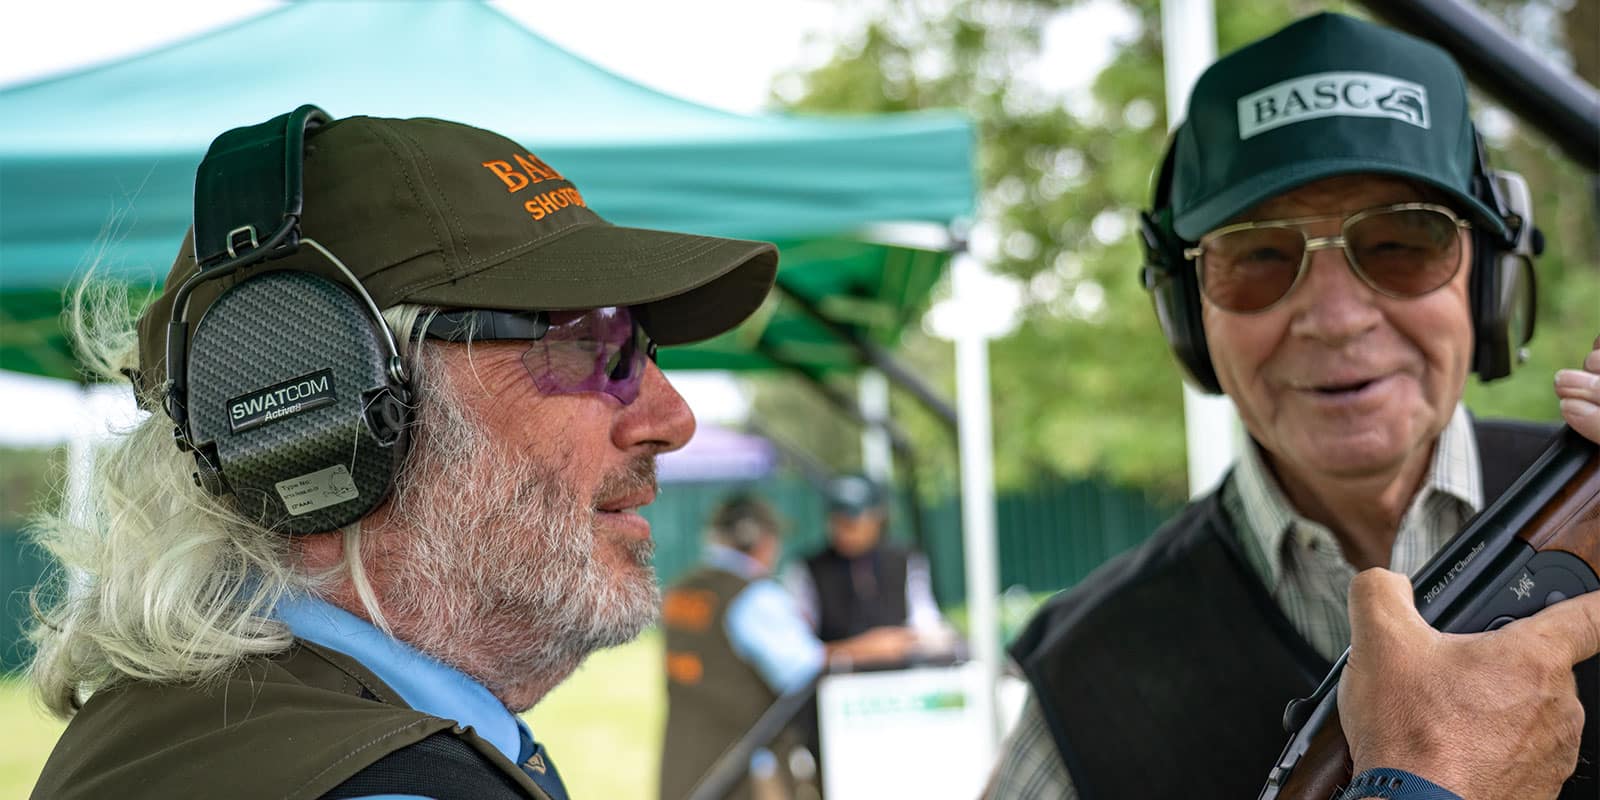 A close up of two shooters wearing SWATCOM ear protection